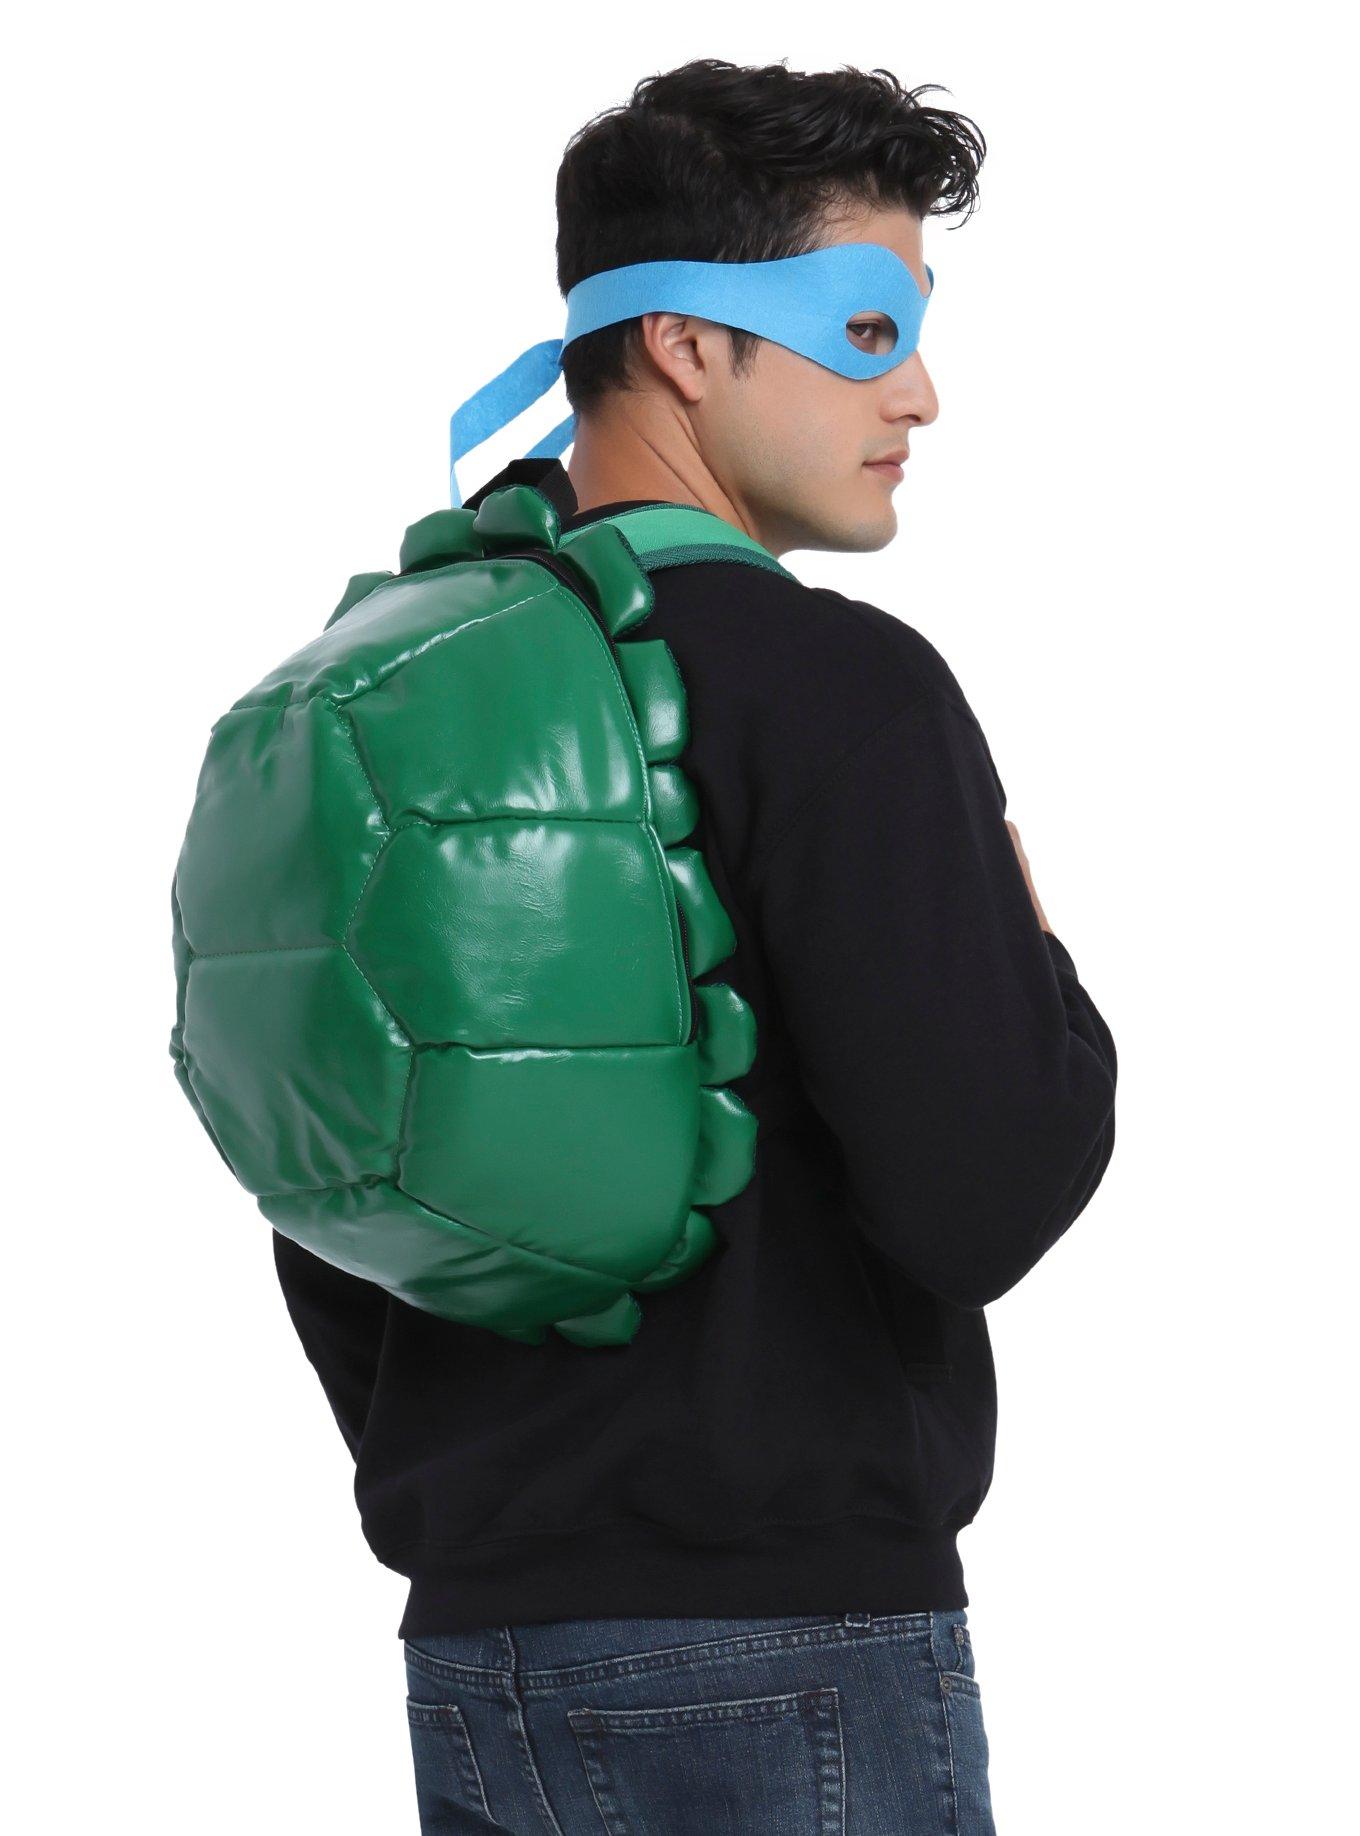 This Teenage Mutant Ninja Turtle backpack is in the shape of a half-shell  and includes four TMNT masks. Tur…